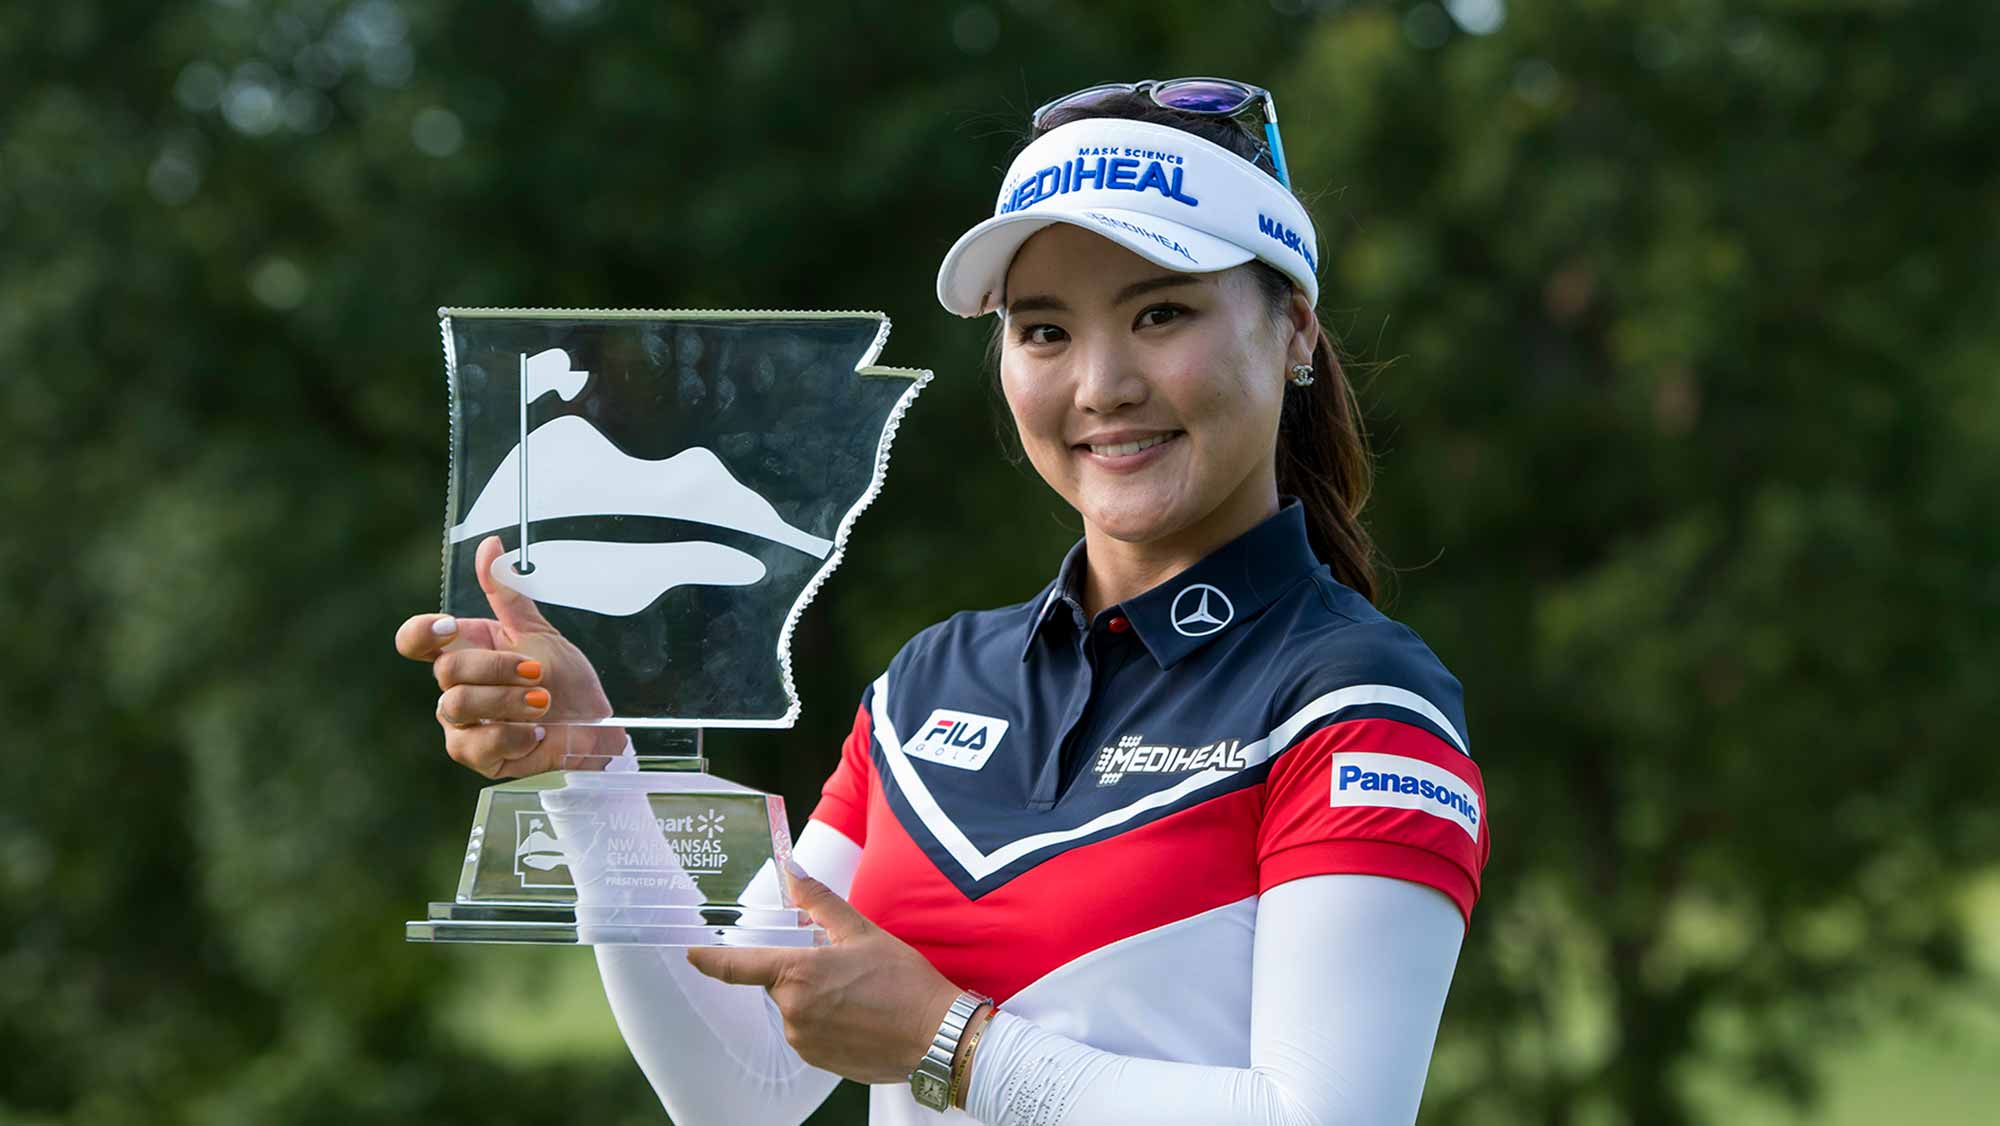 So Yeon Ryu Poses With The Trophy After Winning the 2017 Walmart NW Arkansas Championship presented by P&G